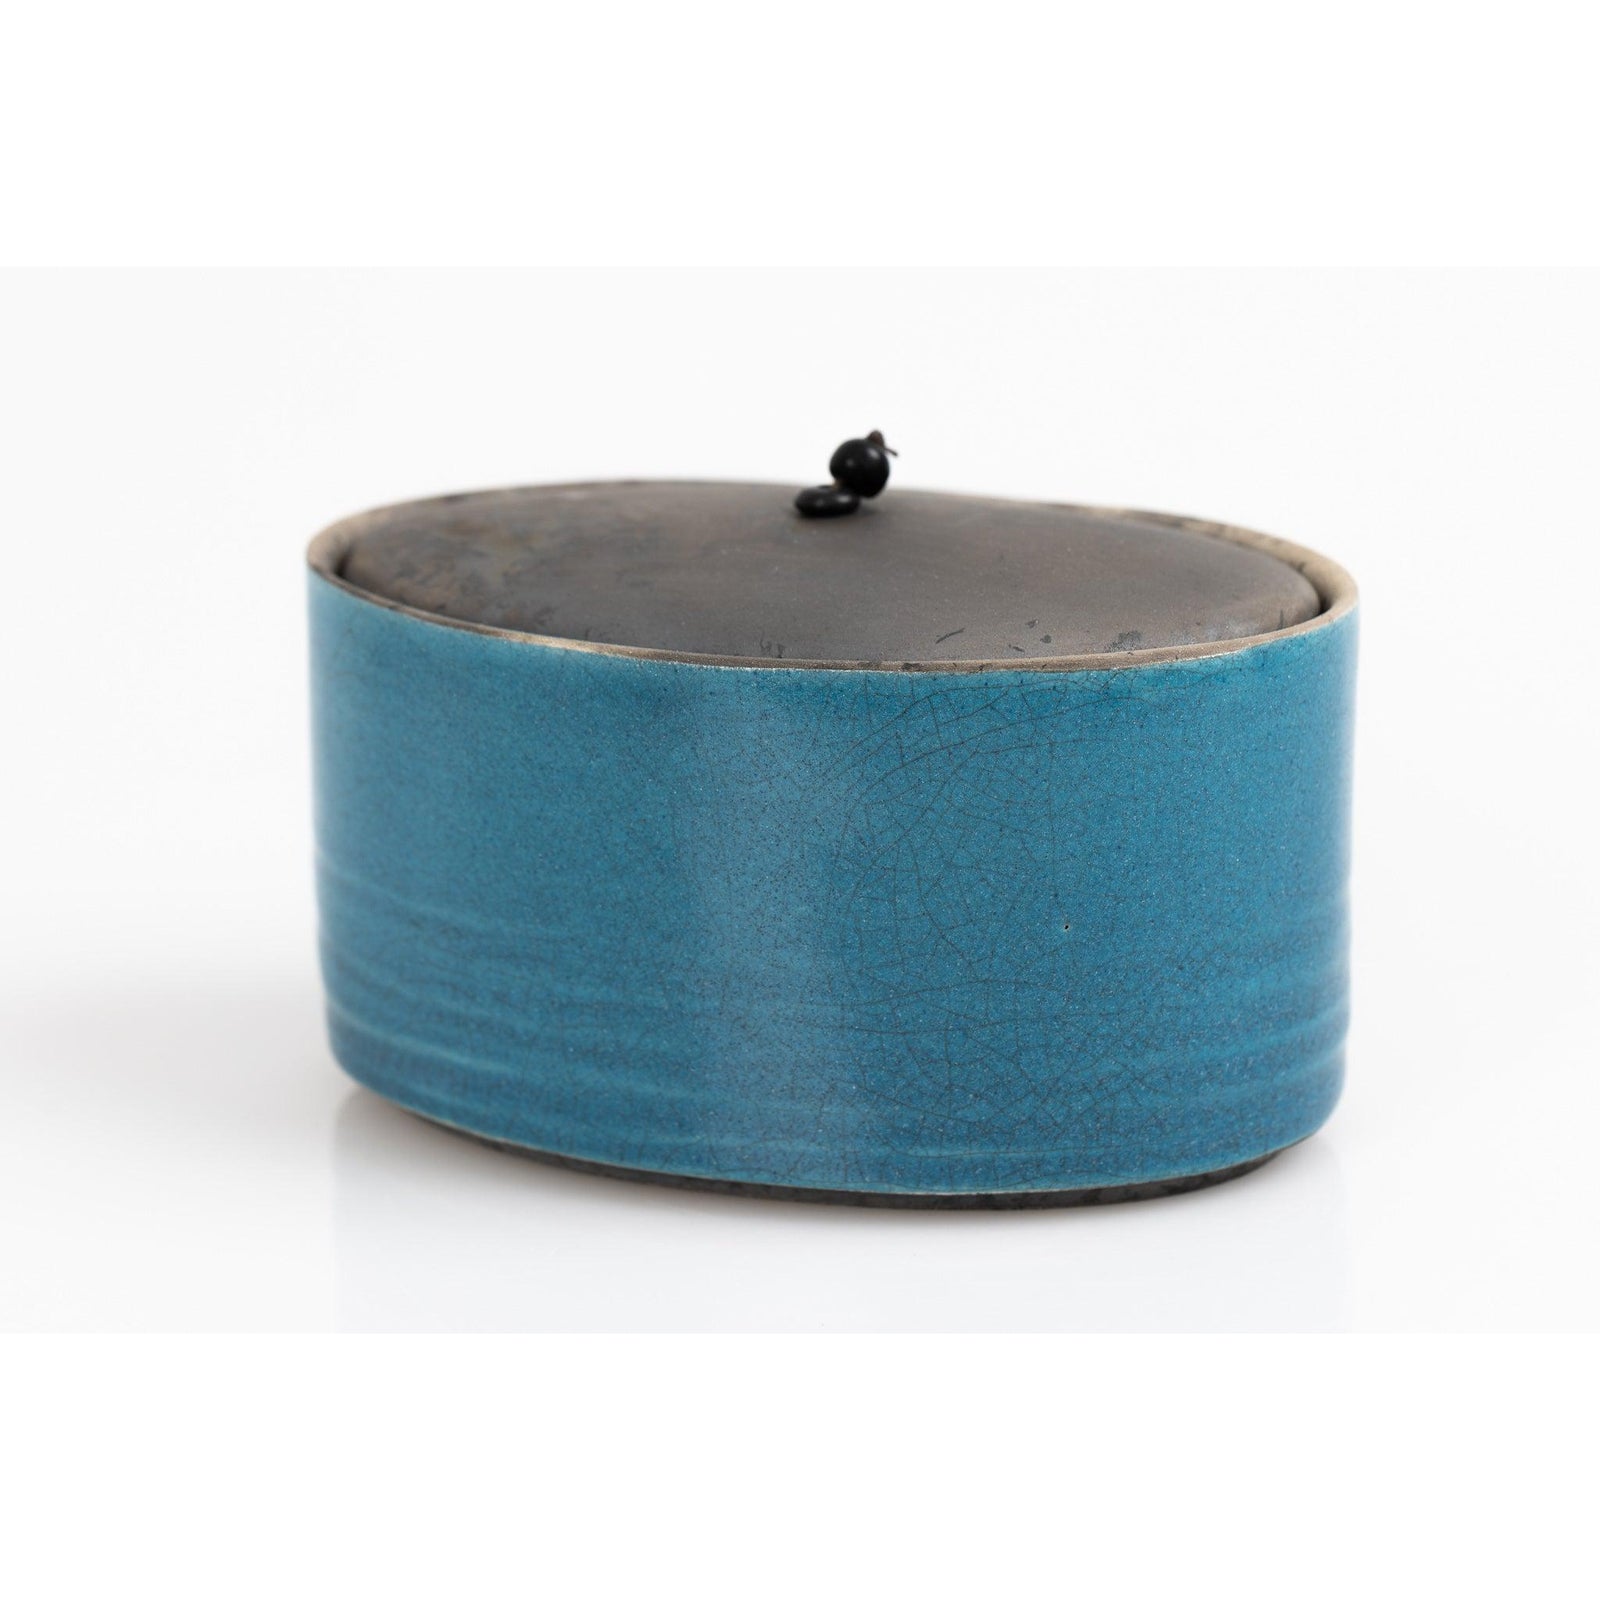 KSDD2 Ellipse, Raku Oval Container by Kate Schuricht, available at Padstow Gallery, Cornwall